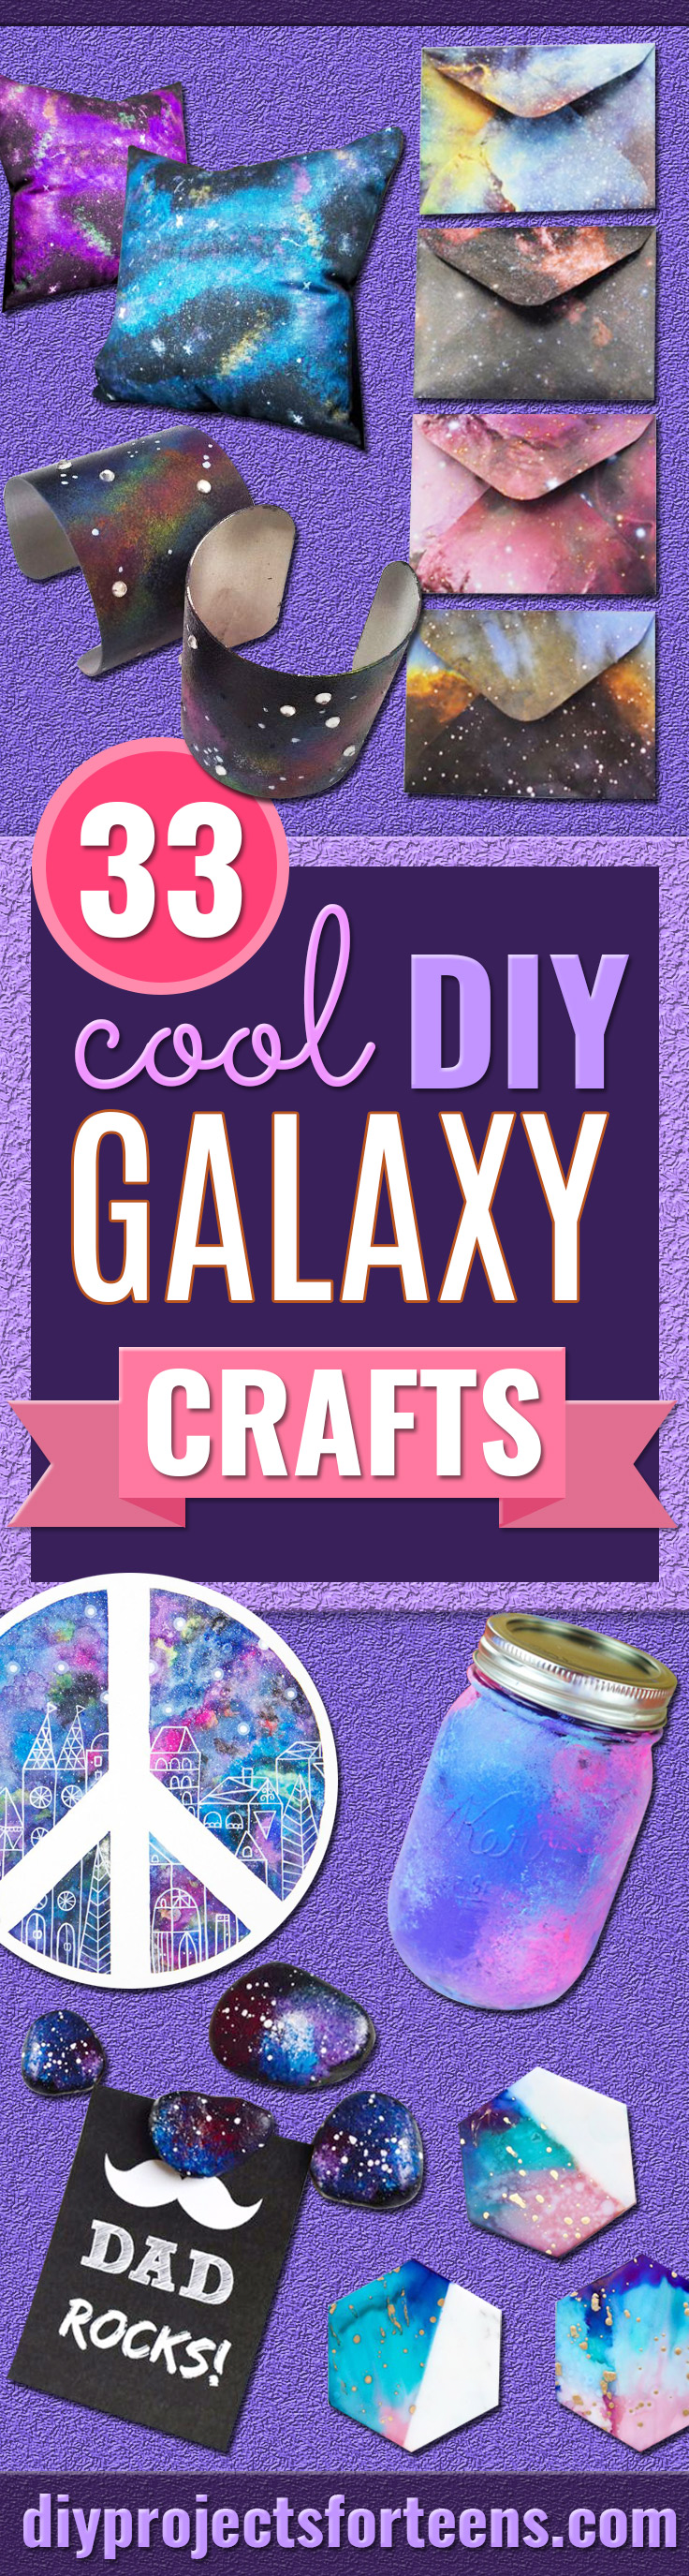 Galaxy DIY Crafts - Easy Room Decor, Cool Clothes, Fun Fabric Ideas and Painting Projects - Food, Cookies and Cupcake Recipes - Nebula Galaxy In A Jar - Art for Your Bedroom - Shirt, Backpack, Soap, Decorations for Teens, Kids and Adults http://stage.diyprojectsforteens.com/galaxy-crafts